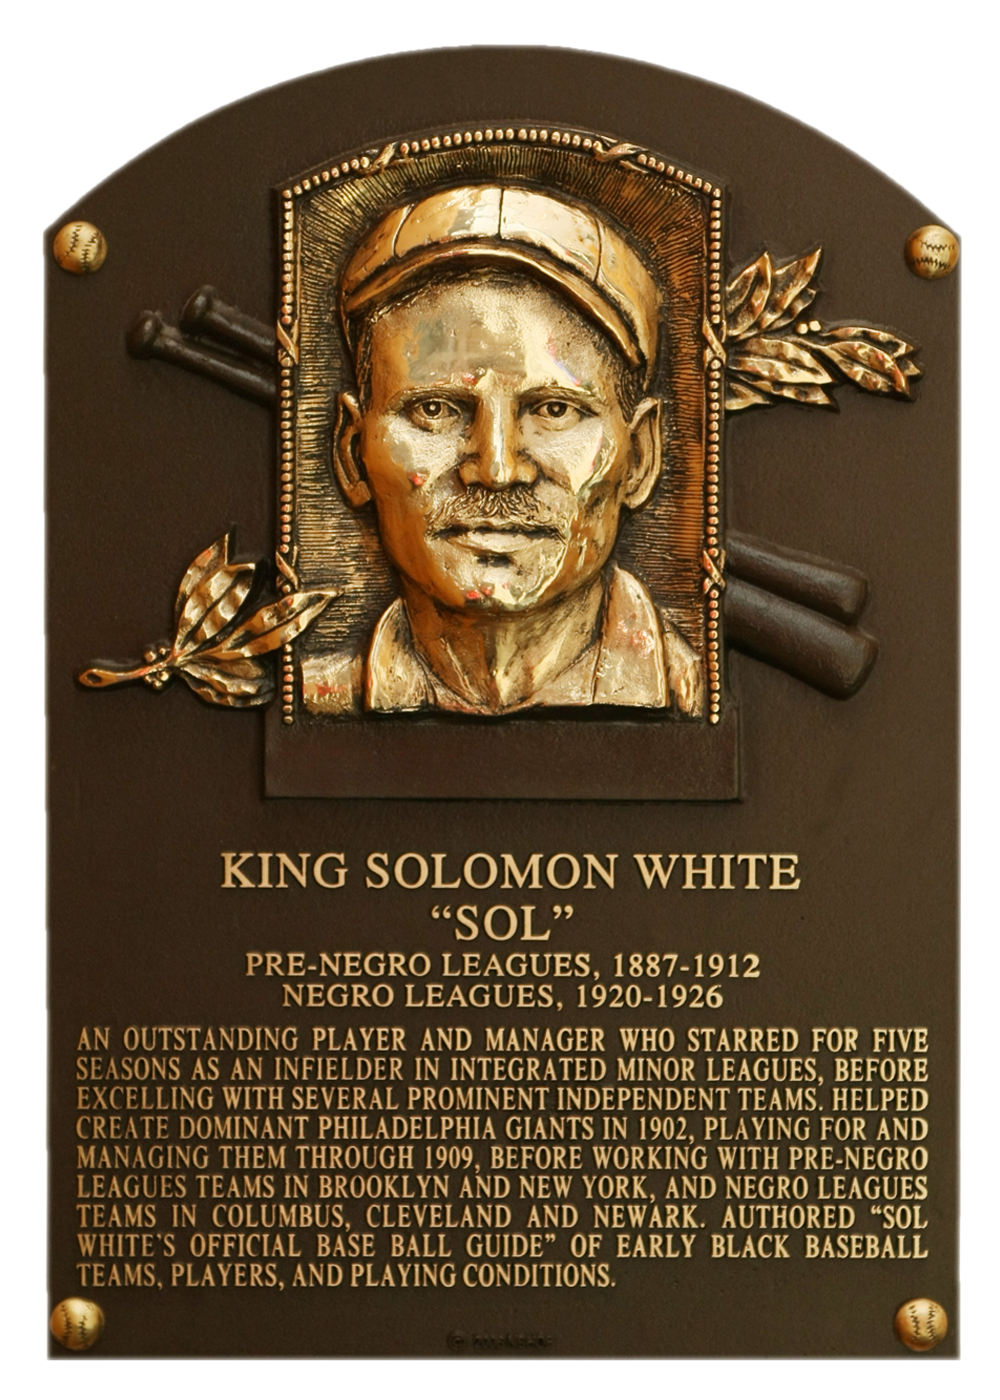 Sol White Hall of Fame plaque